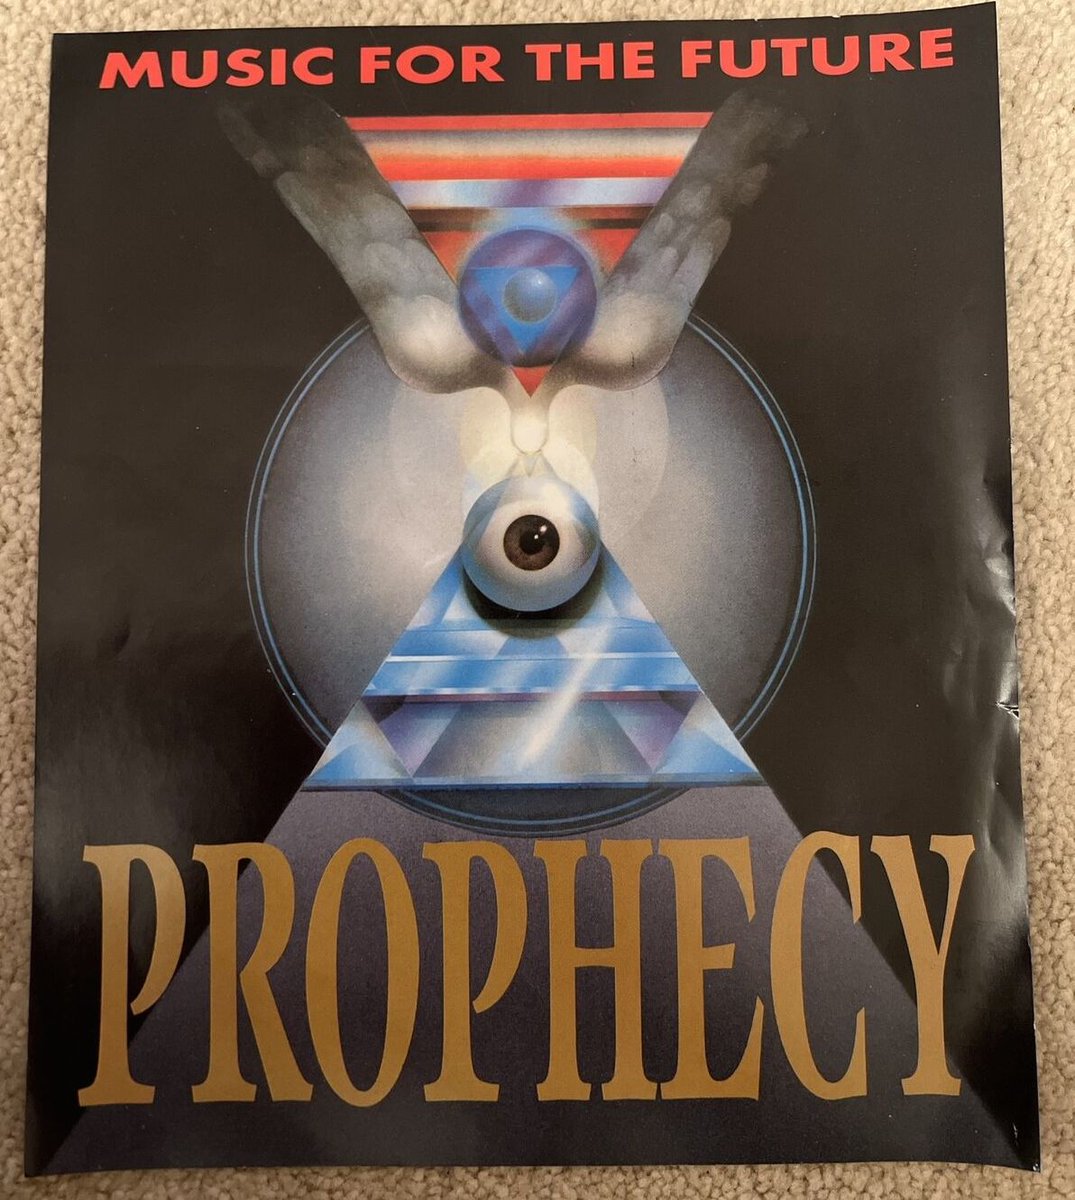 Prophecy, Music For The Future - '92

#ILoveThe90s #1990s #80s90s #90s 

📸 ebay.co.uk/itm/1449380700…